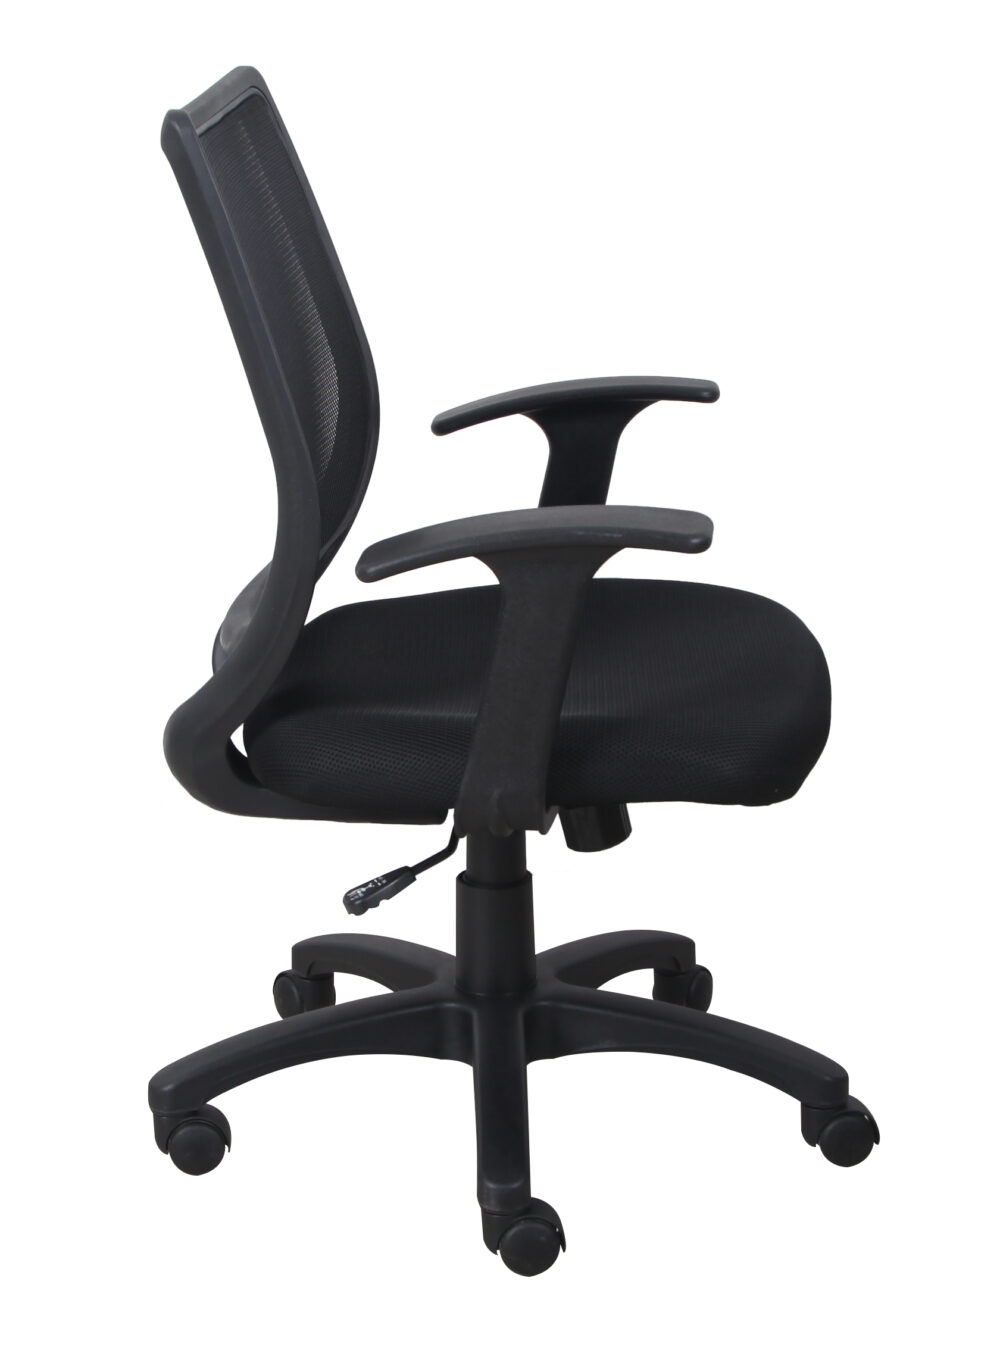 24672 - Office Chair - BX-1490 - Black - Side